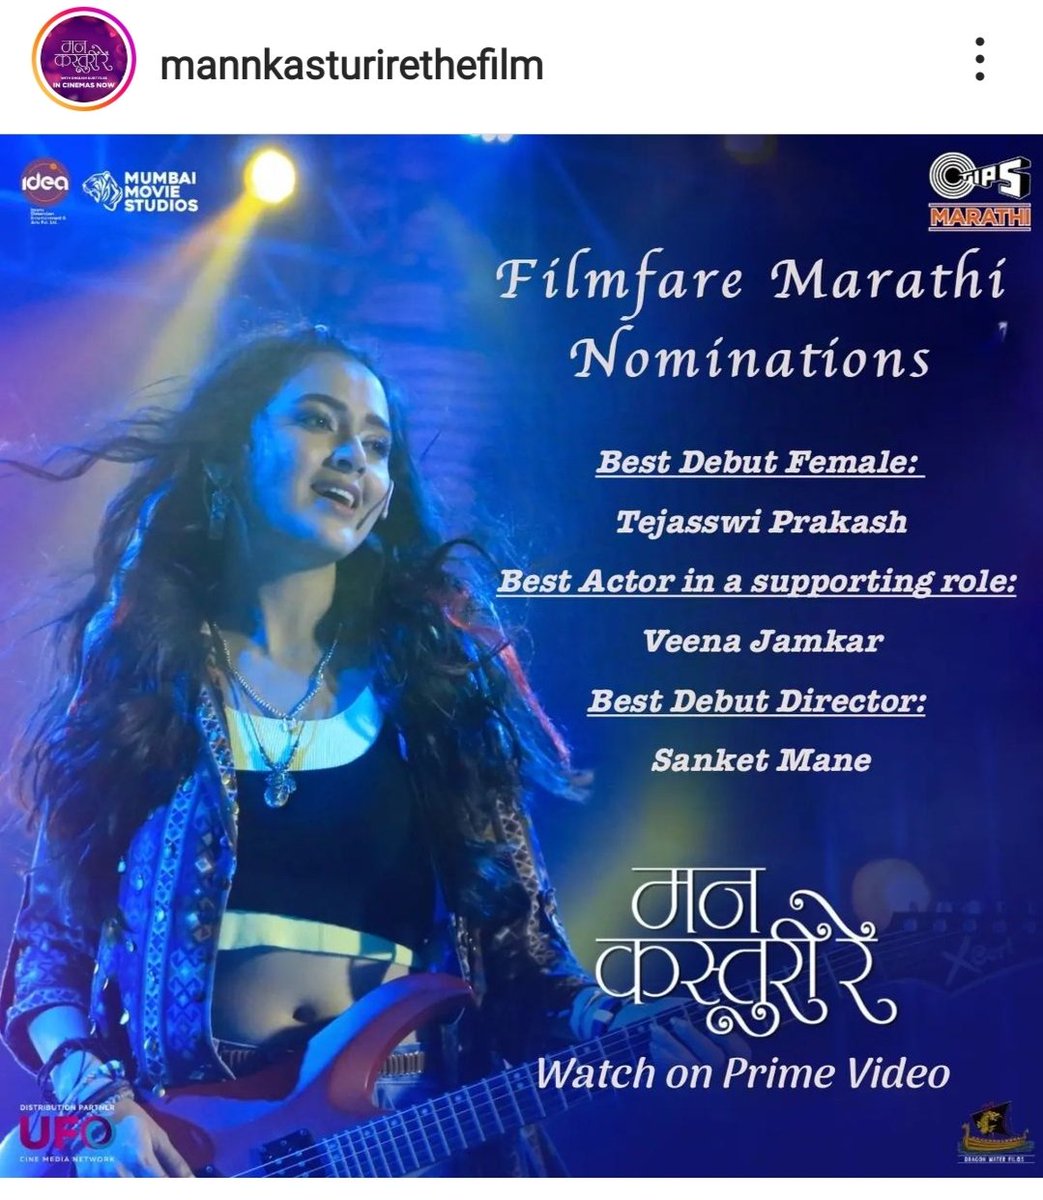 Congratulations to @itsmetejasswi and the team of #MannKasturiRe .

Rooting for #TejasswiPrakash to win the award for best debute female.
#FilmFare #PlanetMarathiFilmfareAwards
@PlanetMarathi @filmfare